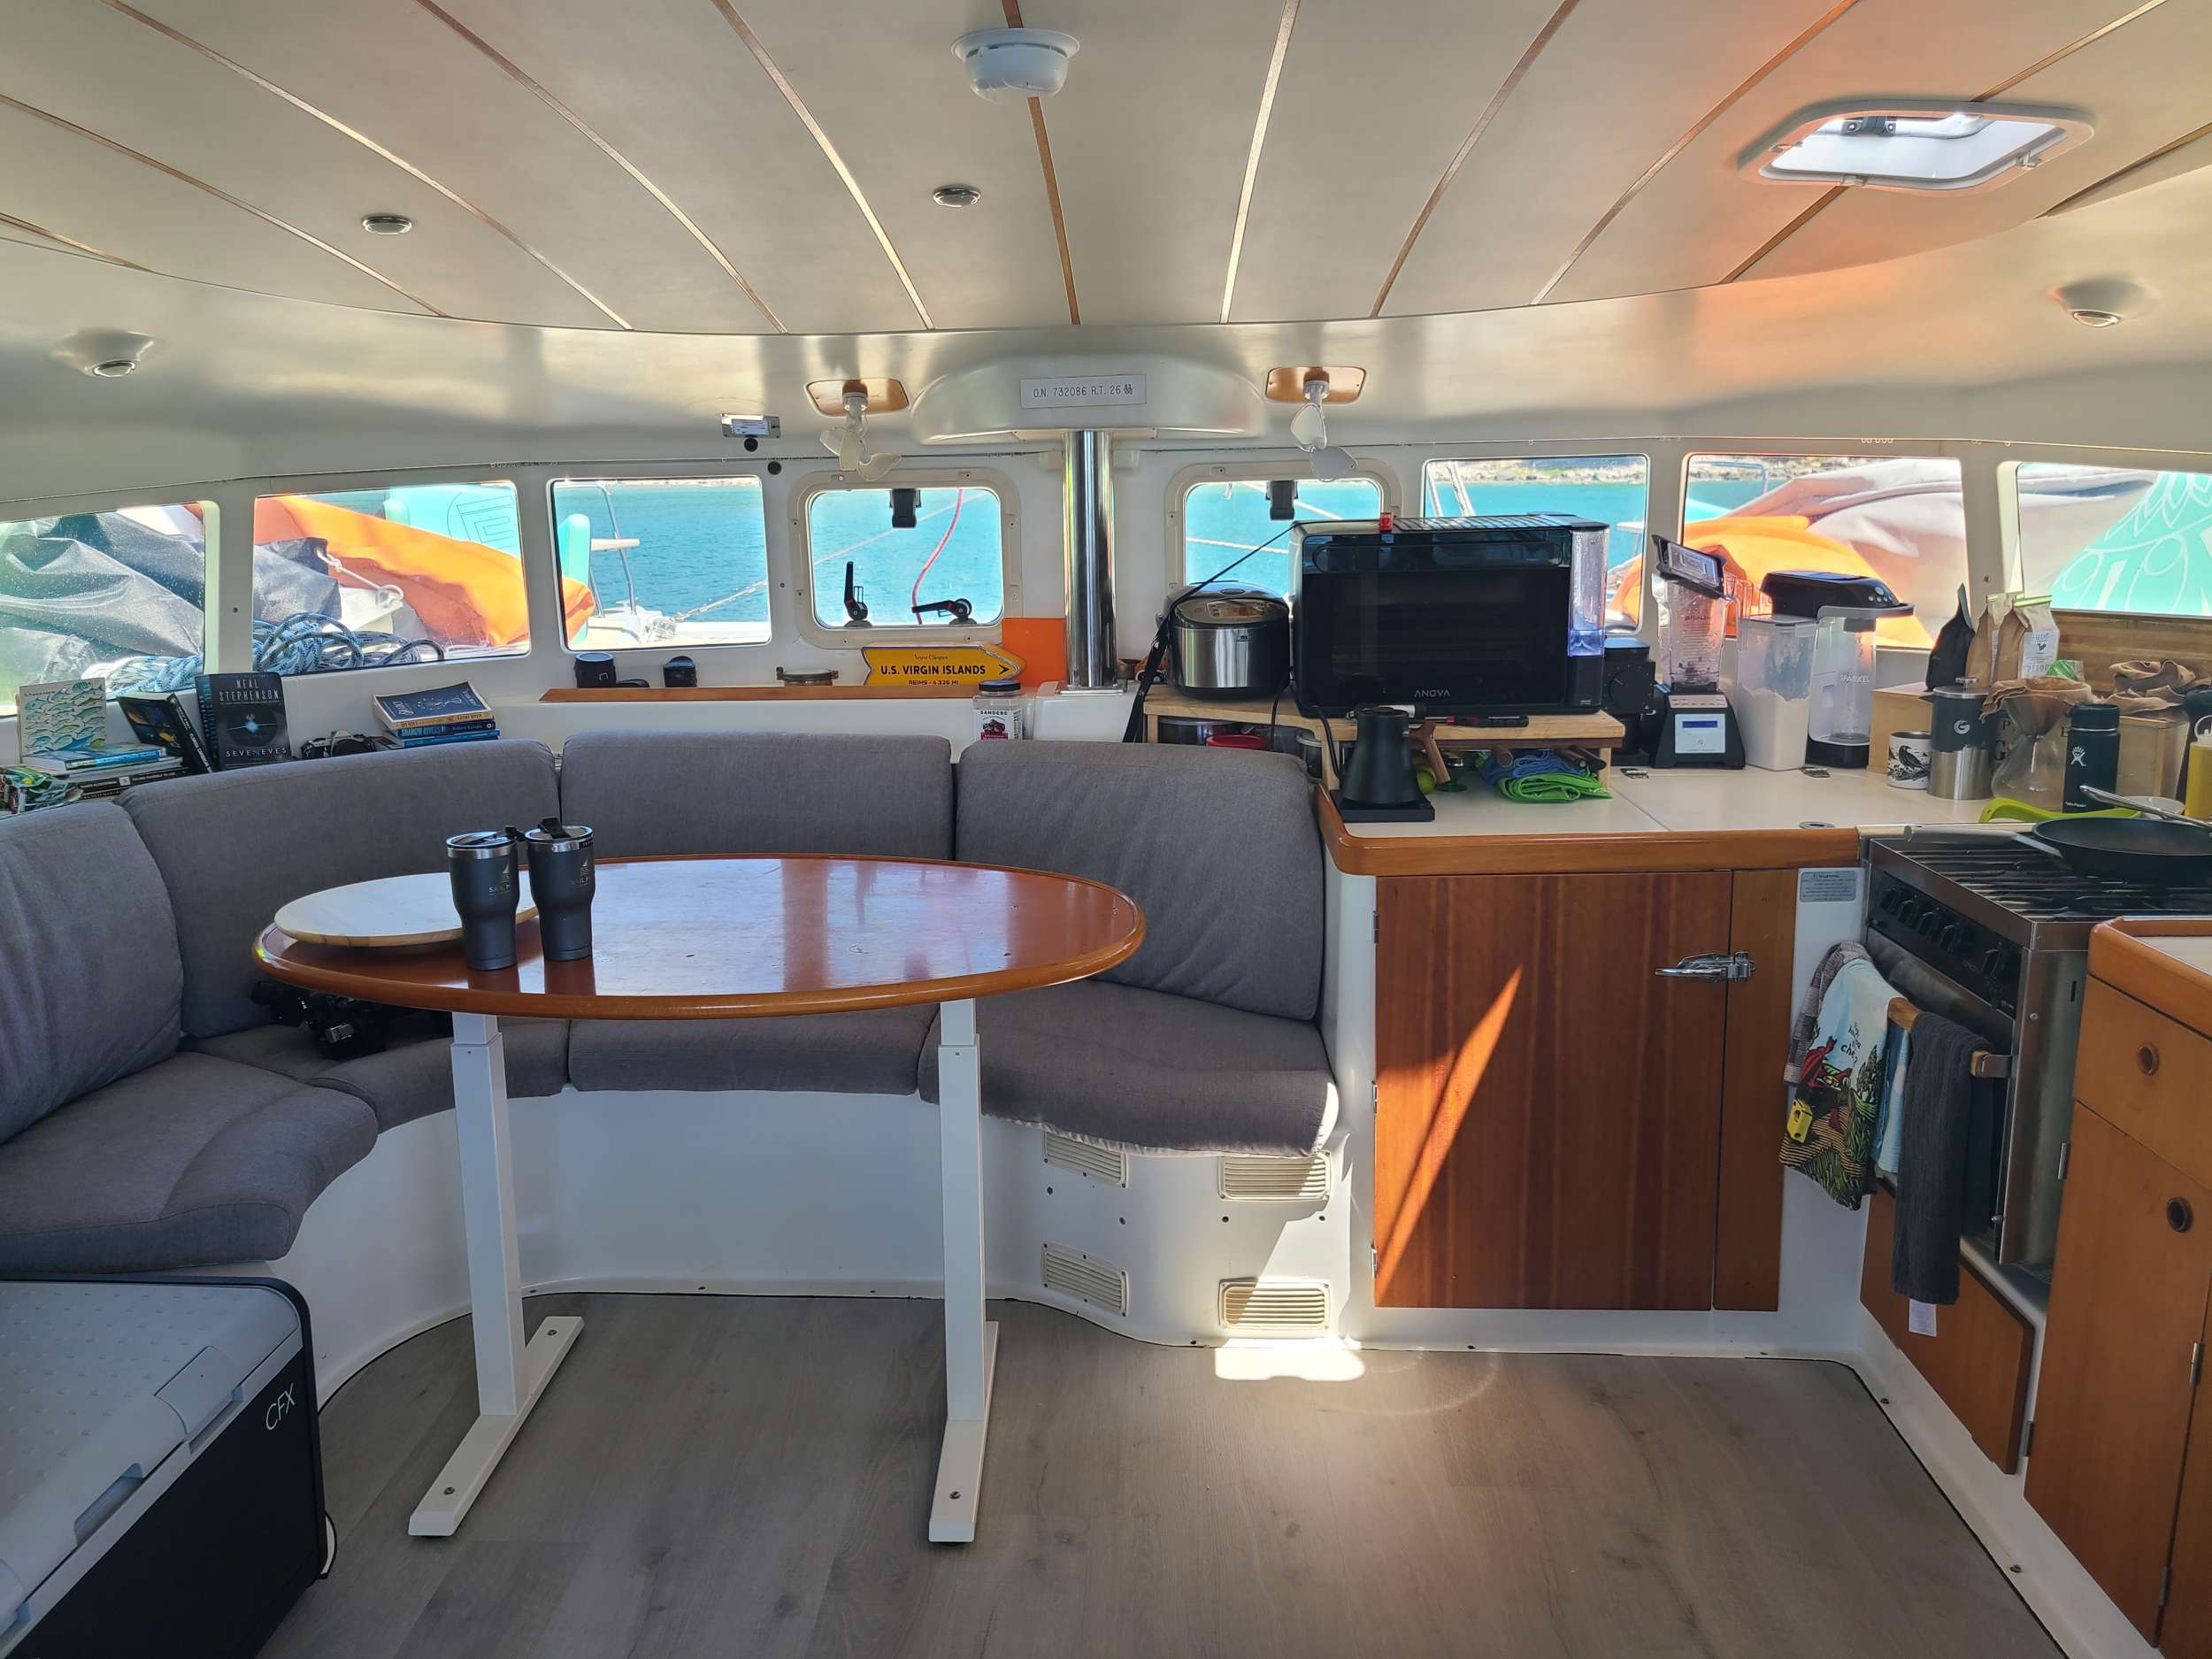 MIMBAW Yacht Charter - Where it all happens - the Galley